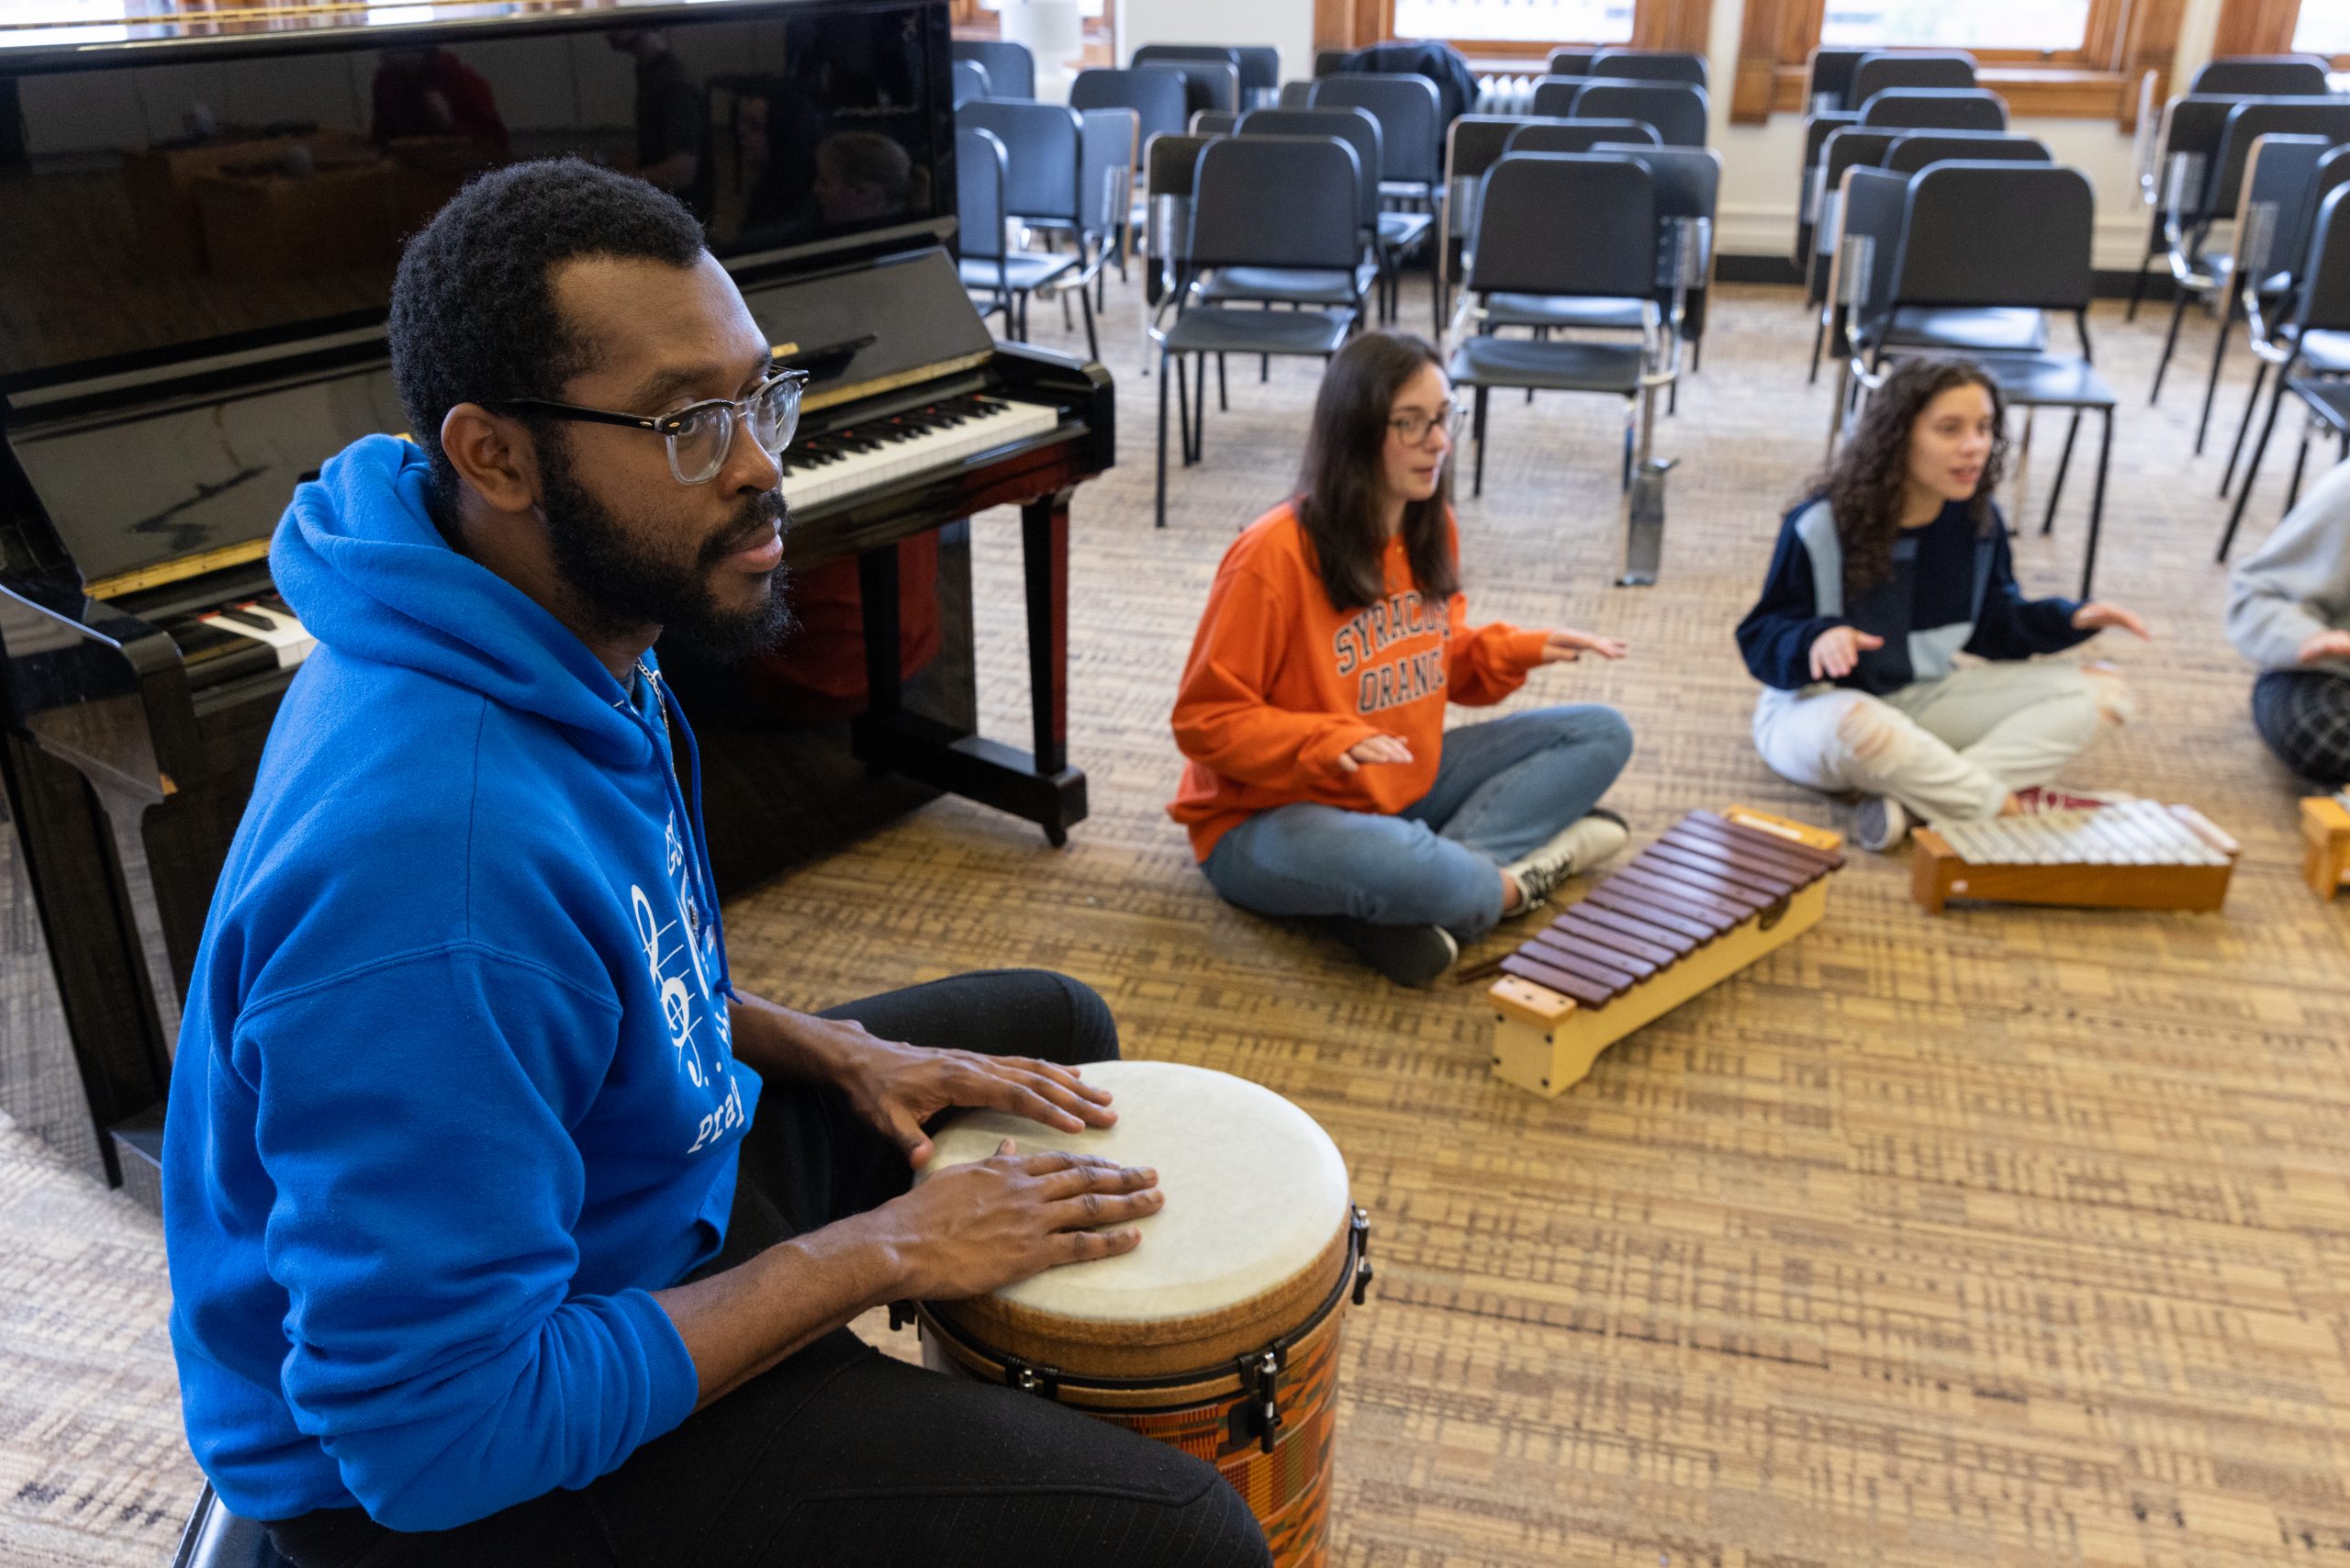 students play the drums, xylophone, and other instruments in a music education class